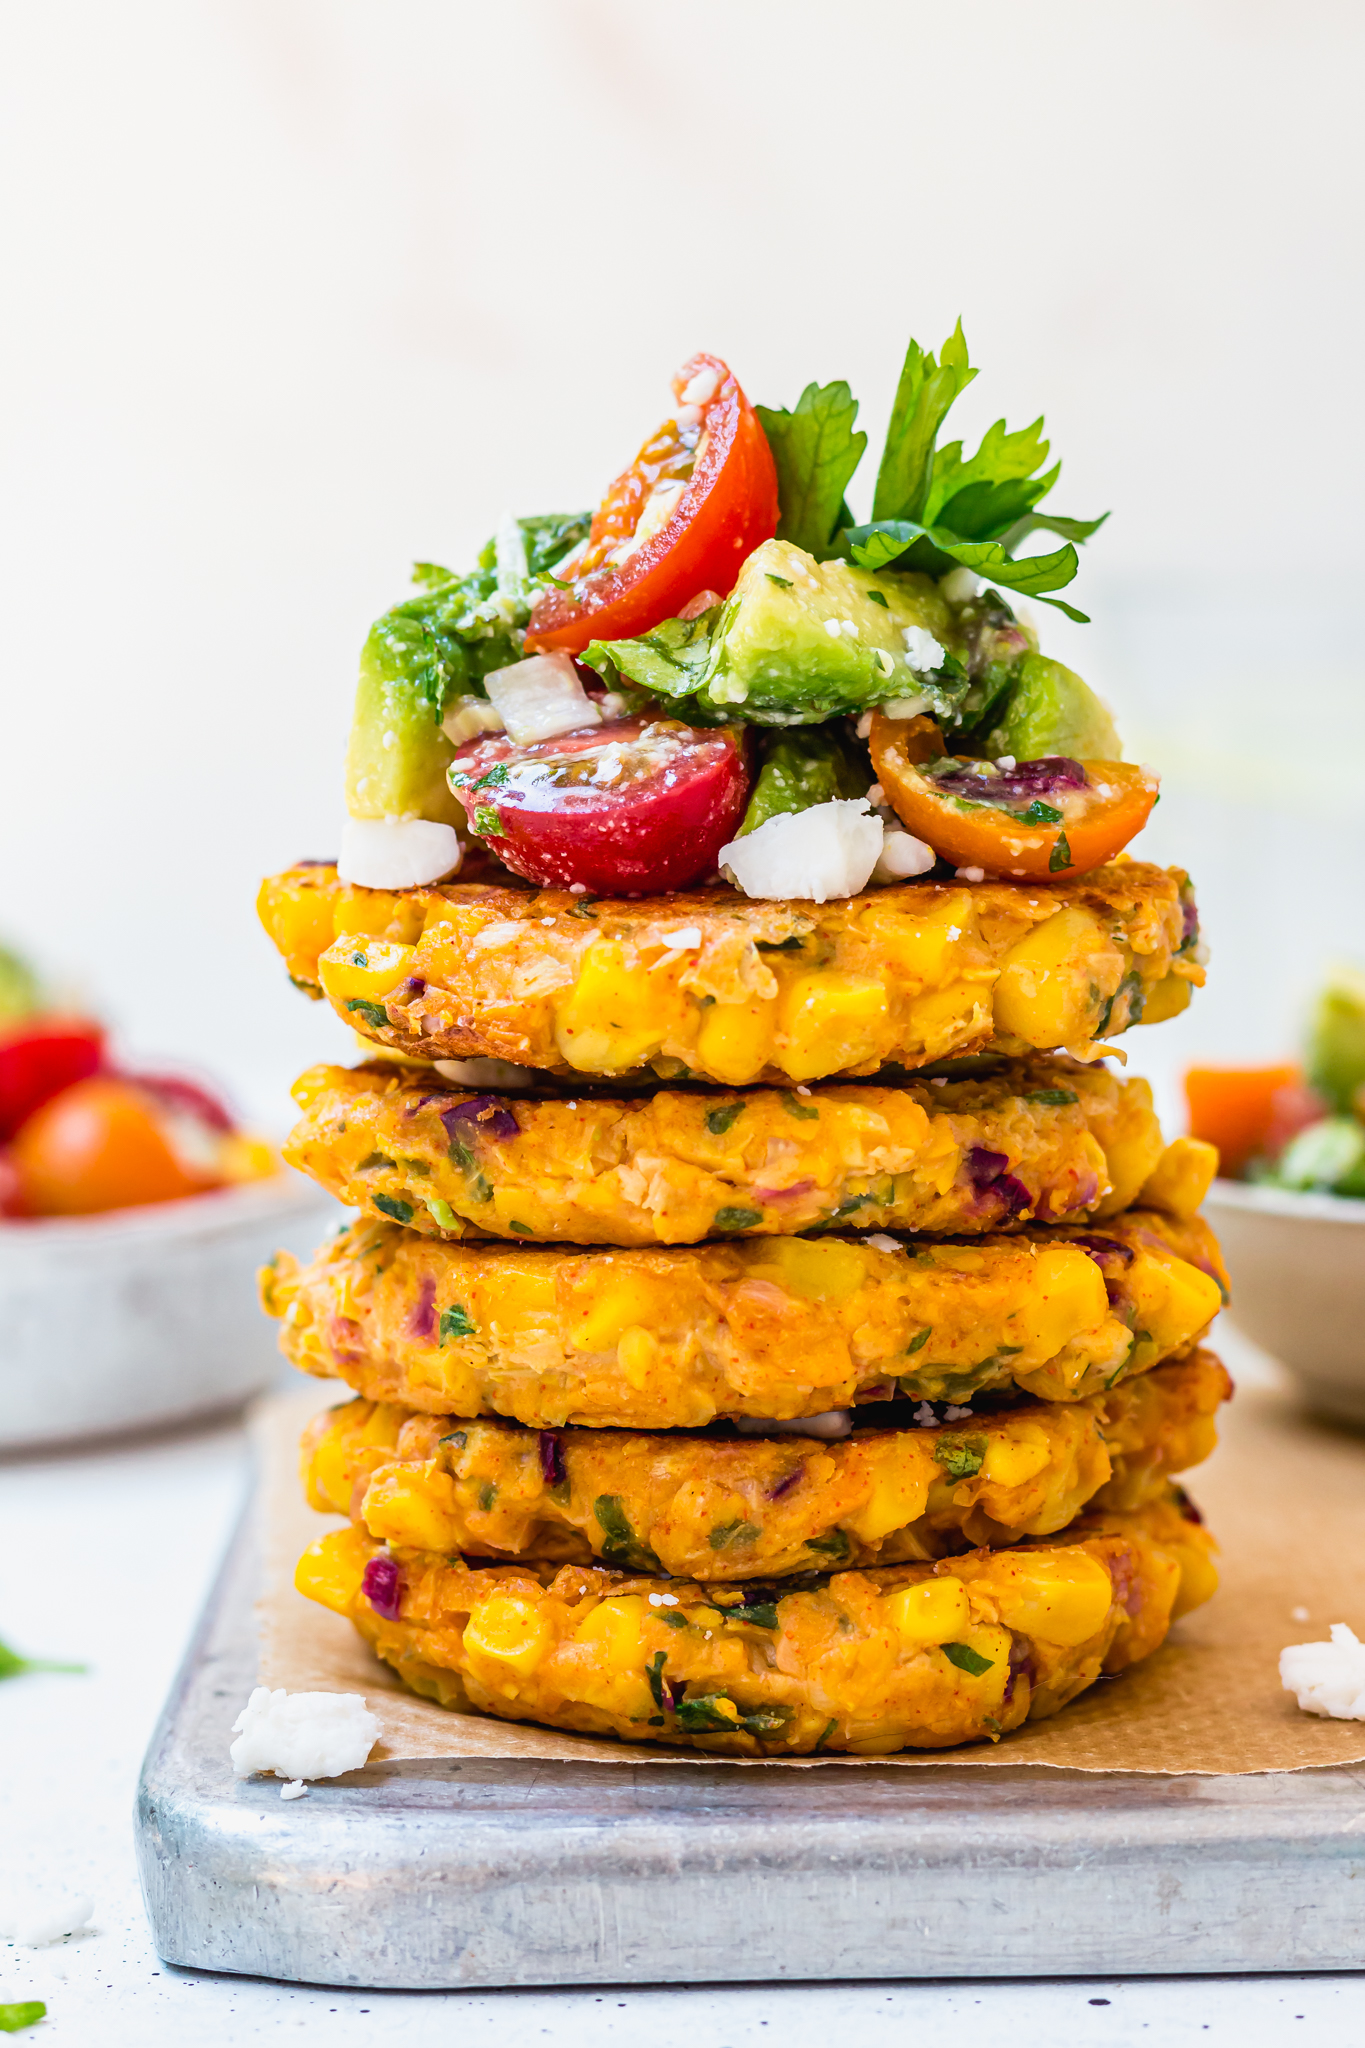 Sweetcorn Fritters with Avocado, Tomato and “Feta” Salad